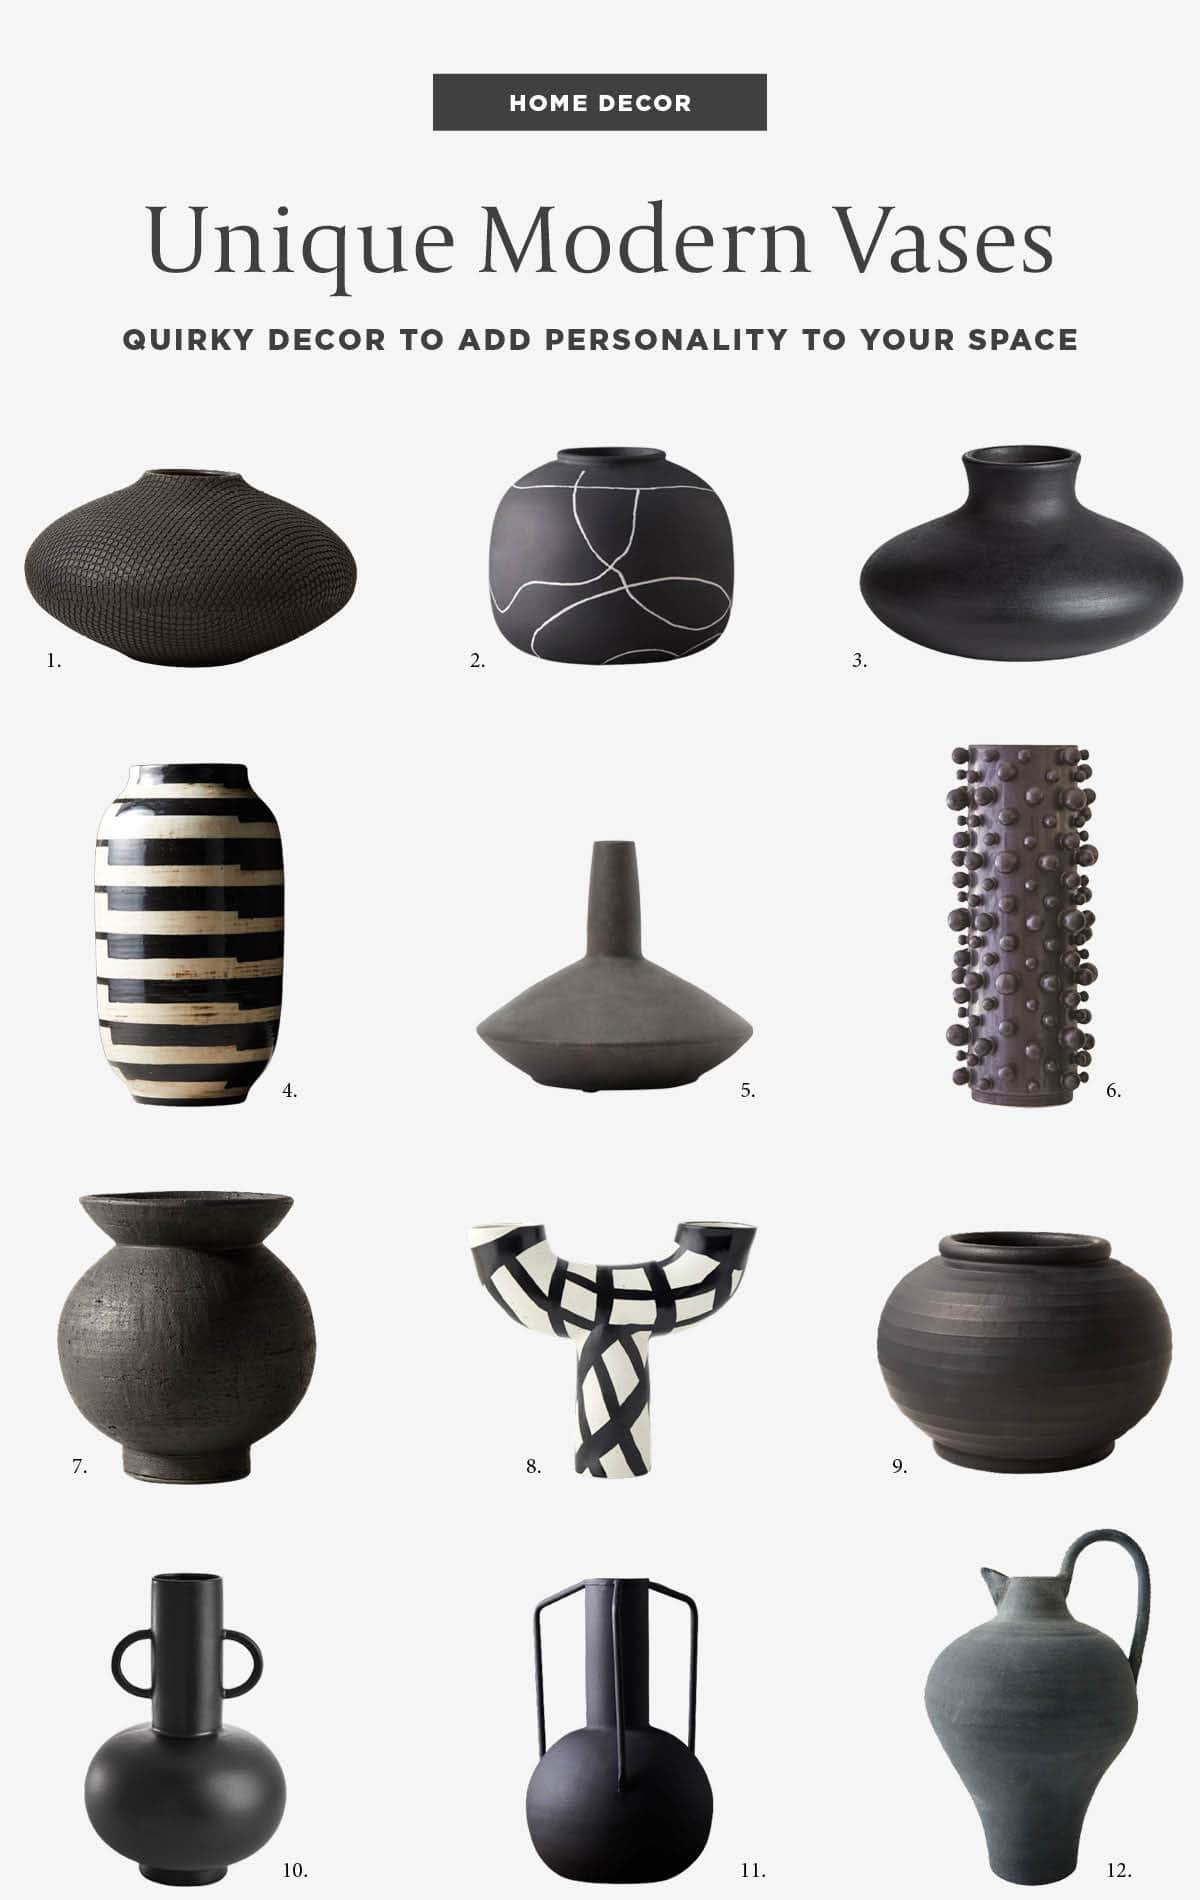 Funky Fresh: Quirky Modern Vases That Add Personality to Your Space - Looking for something out of the ordinary? Check out these unique modern black vases that add a touch of artistry and elegance to your home decor.